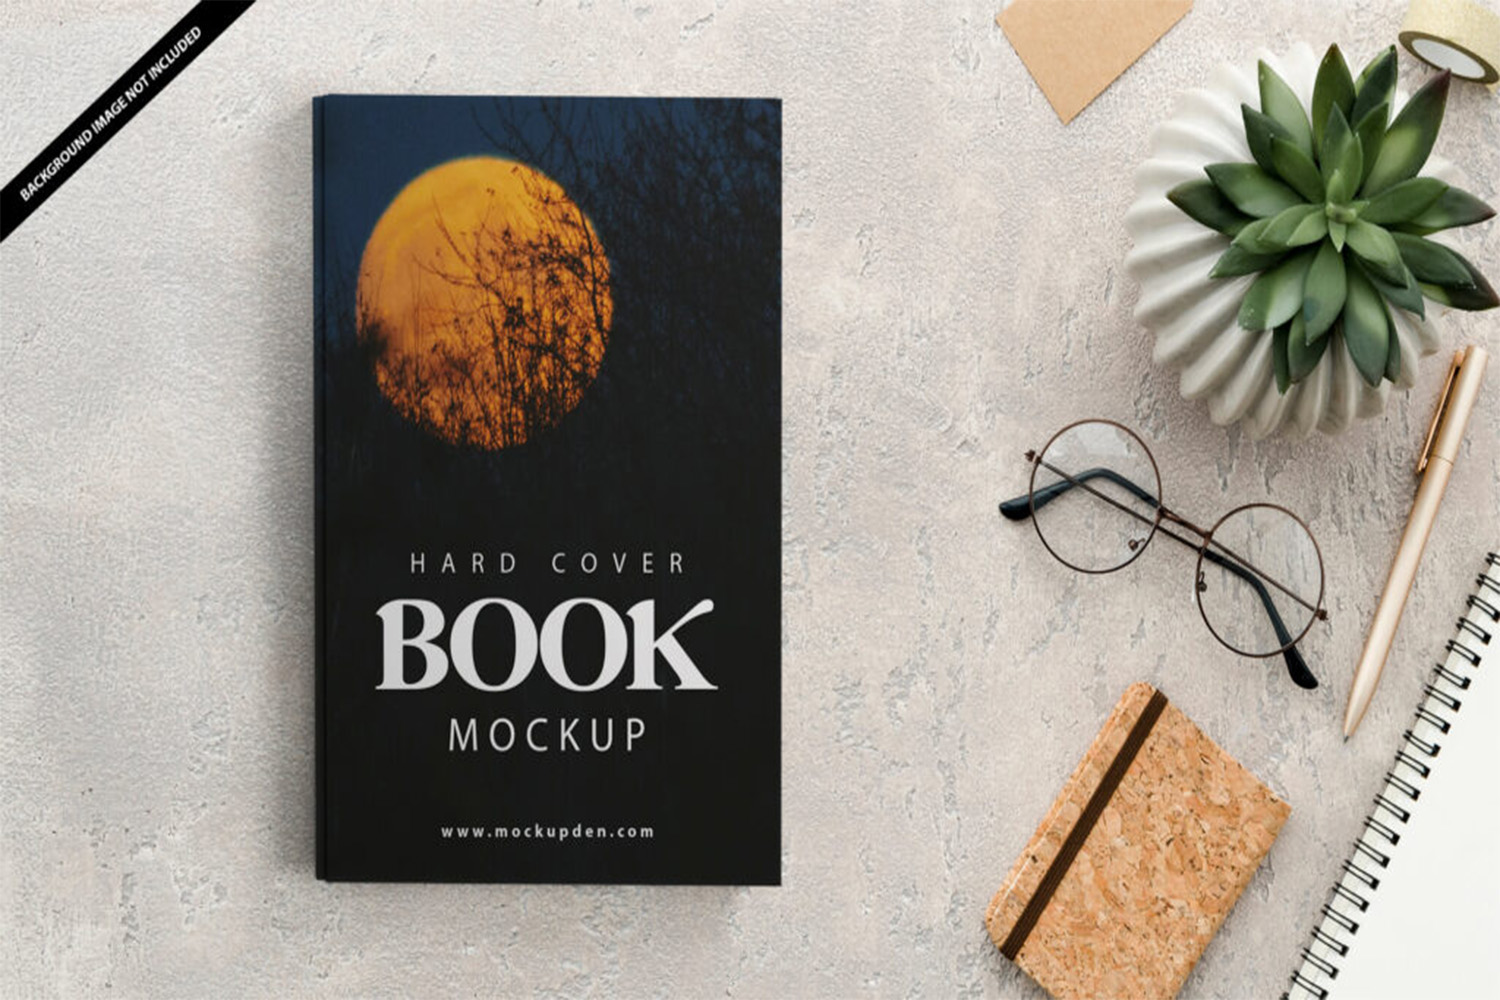 Hard Cover Book Template Mockup Free Download